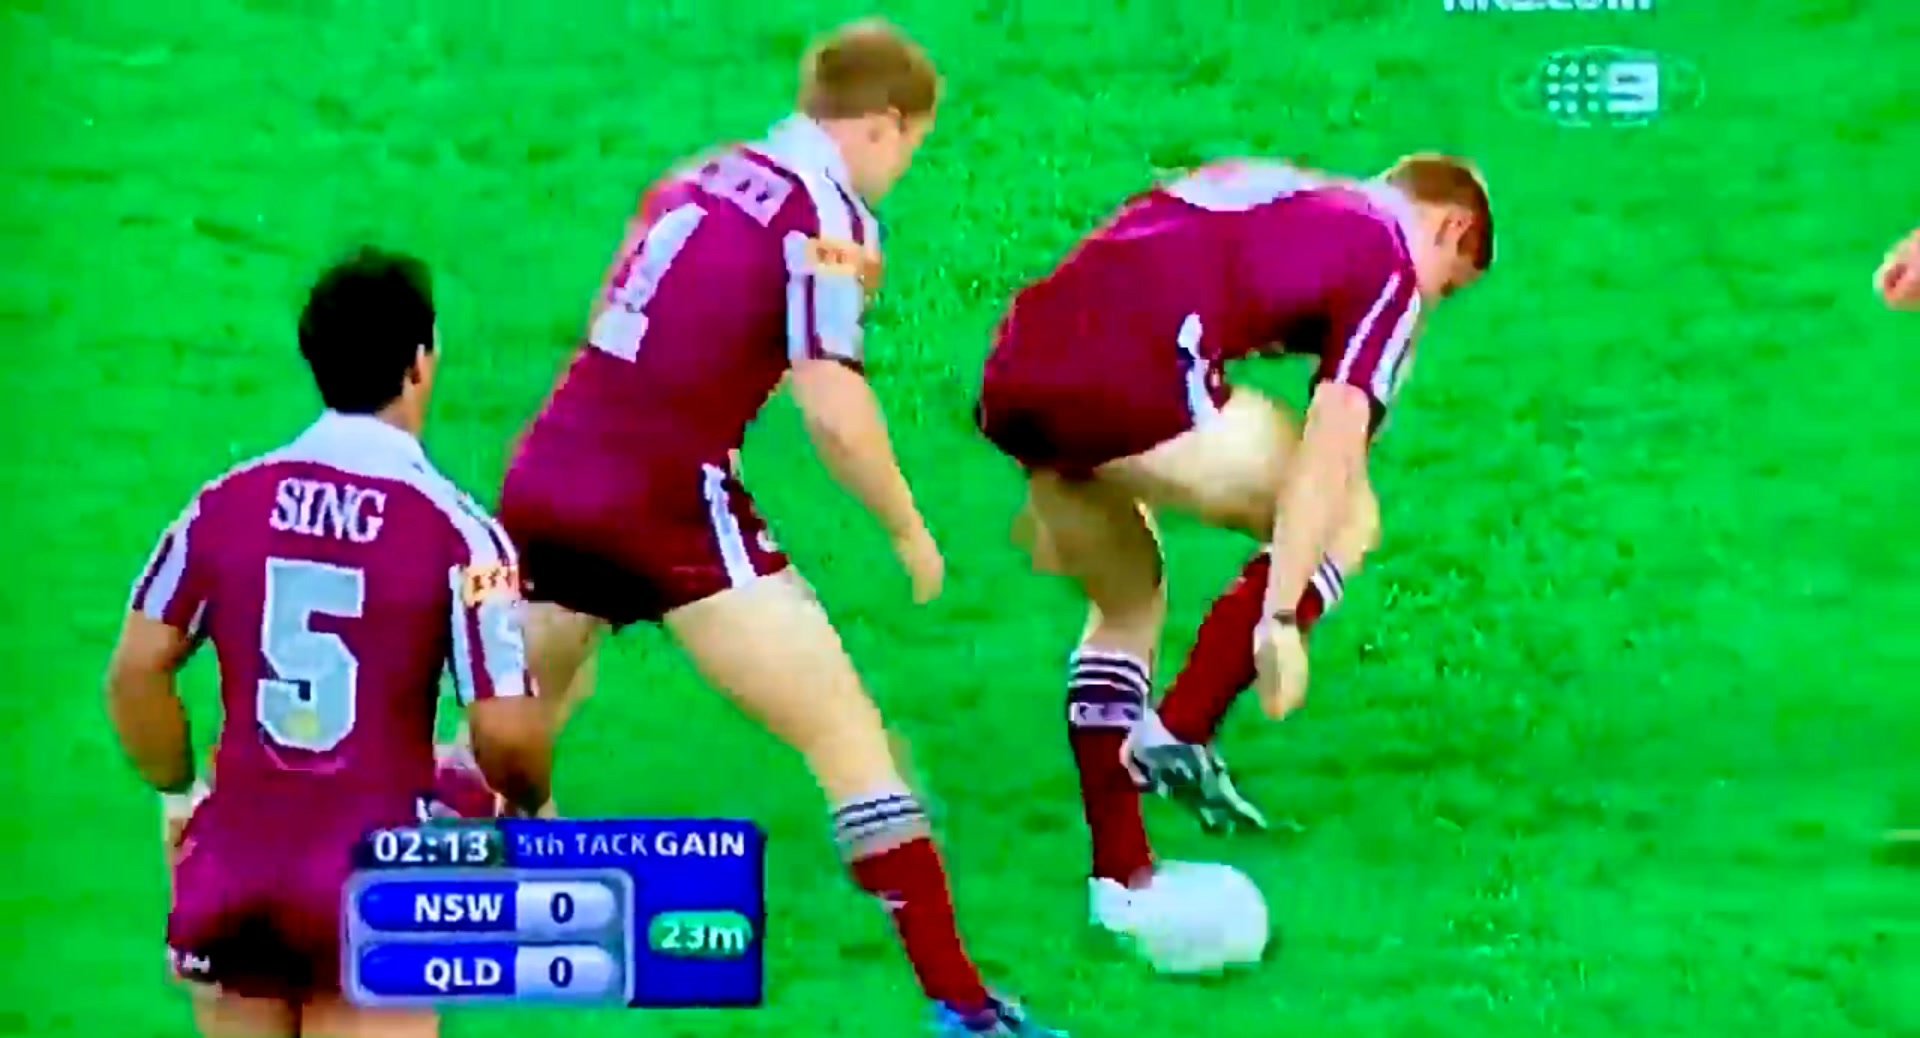 I Love Rugby Bubblebutts - video 6